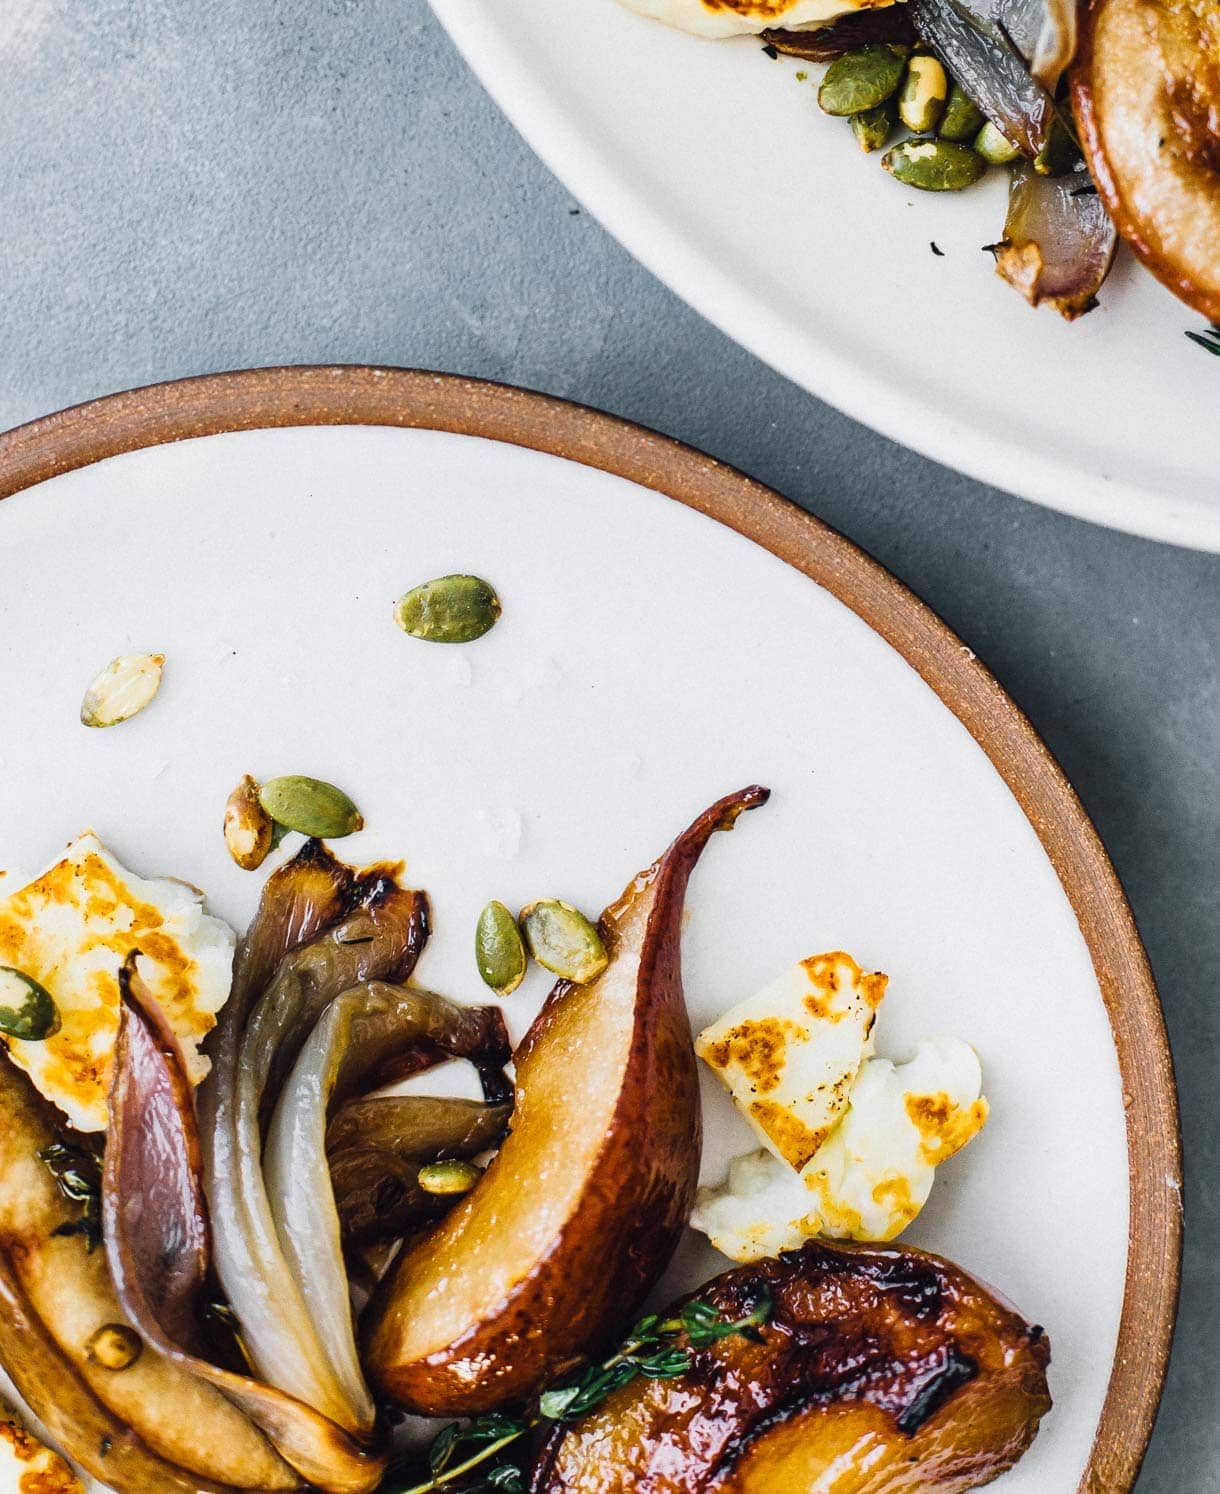 Baked Pears with Halloumi Cheese & Pepita Seeds